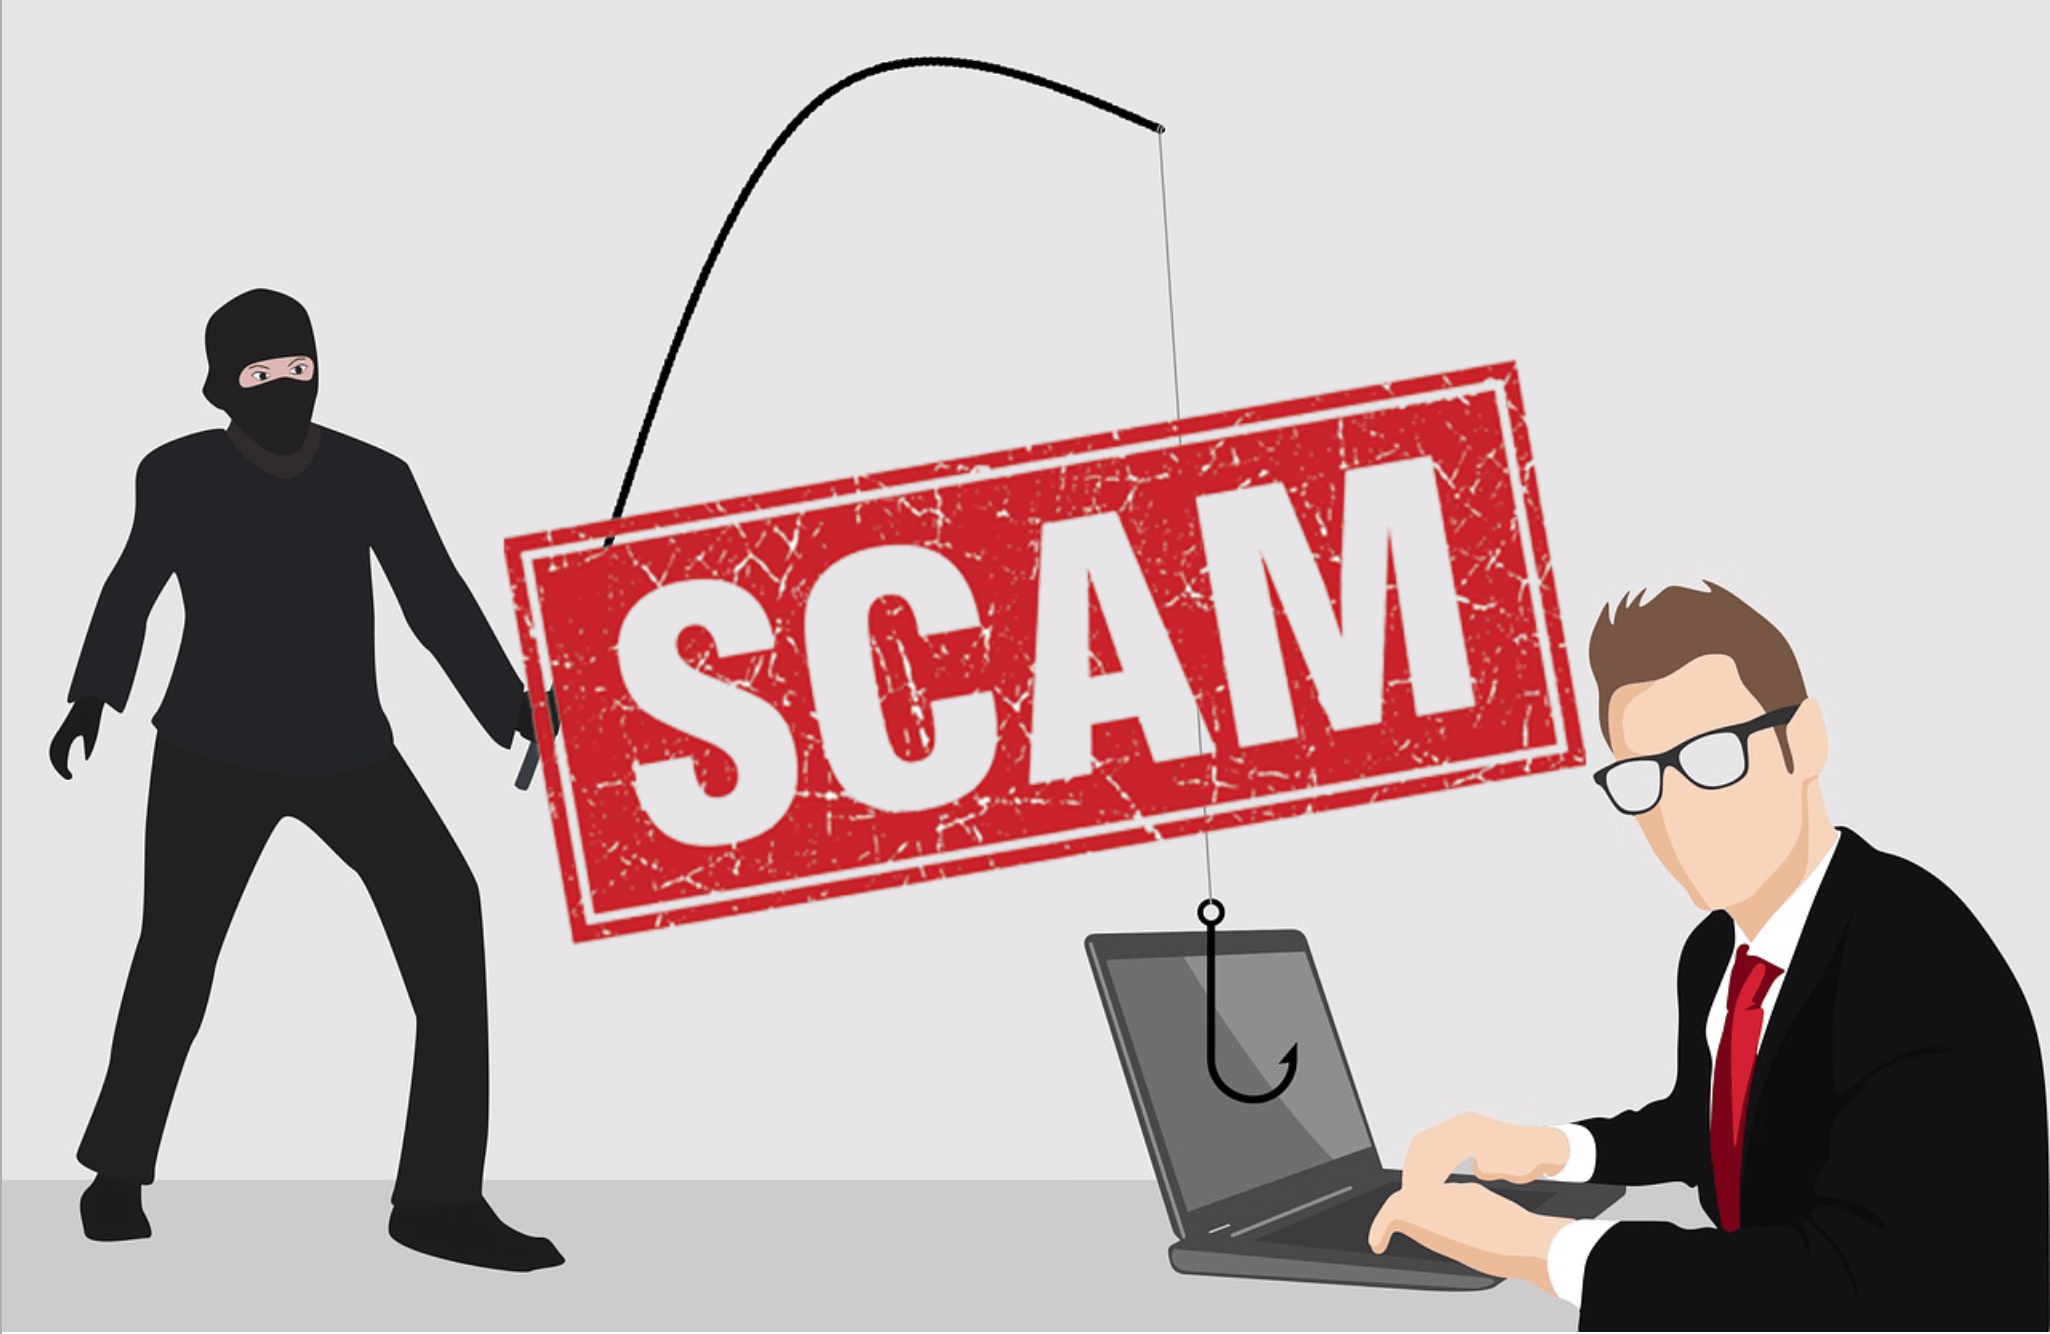 Watch out for These Top Scams Money Matters